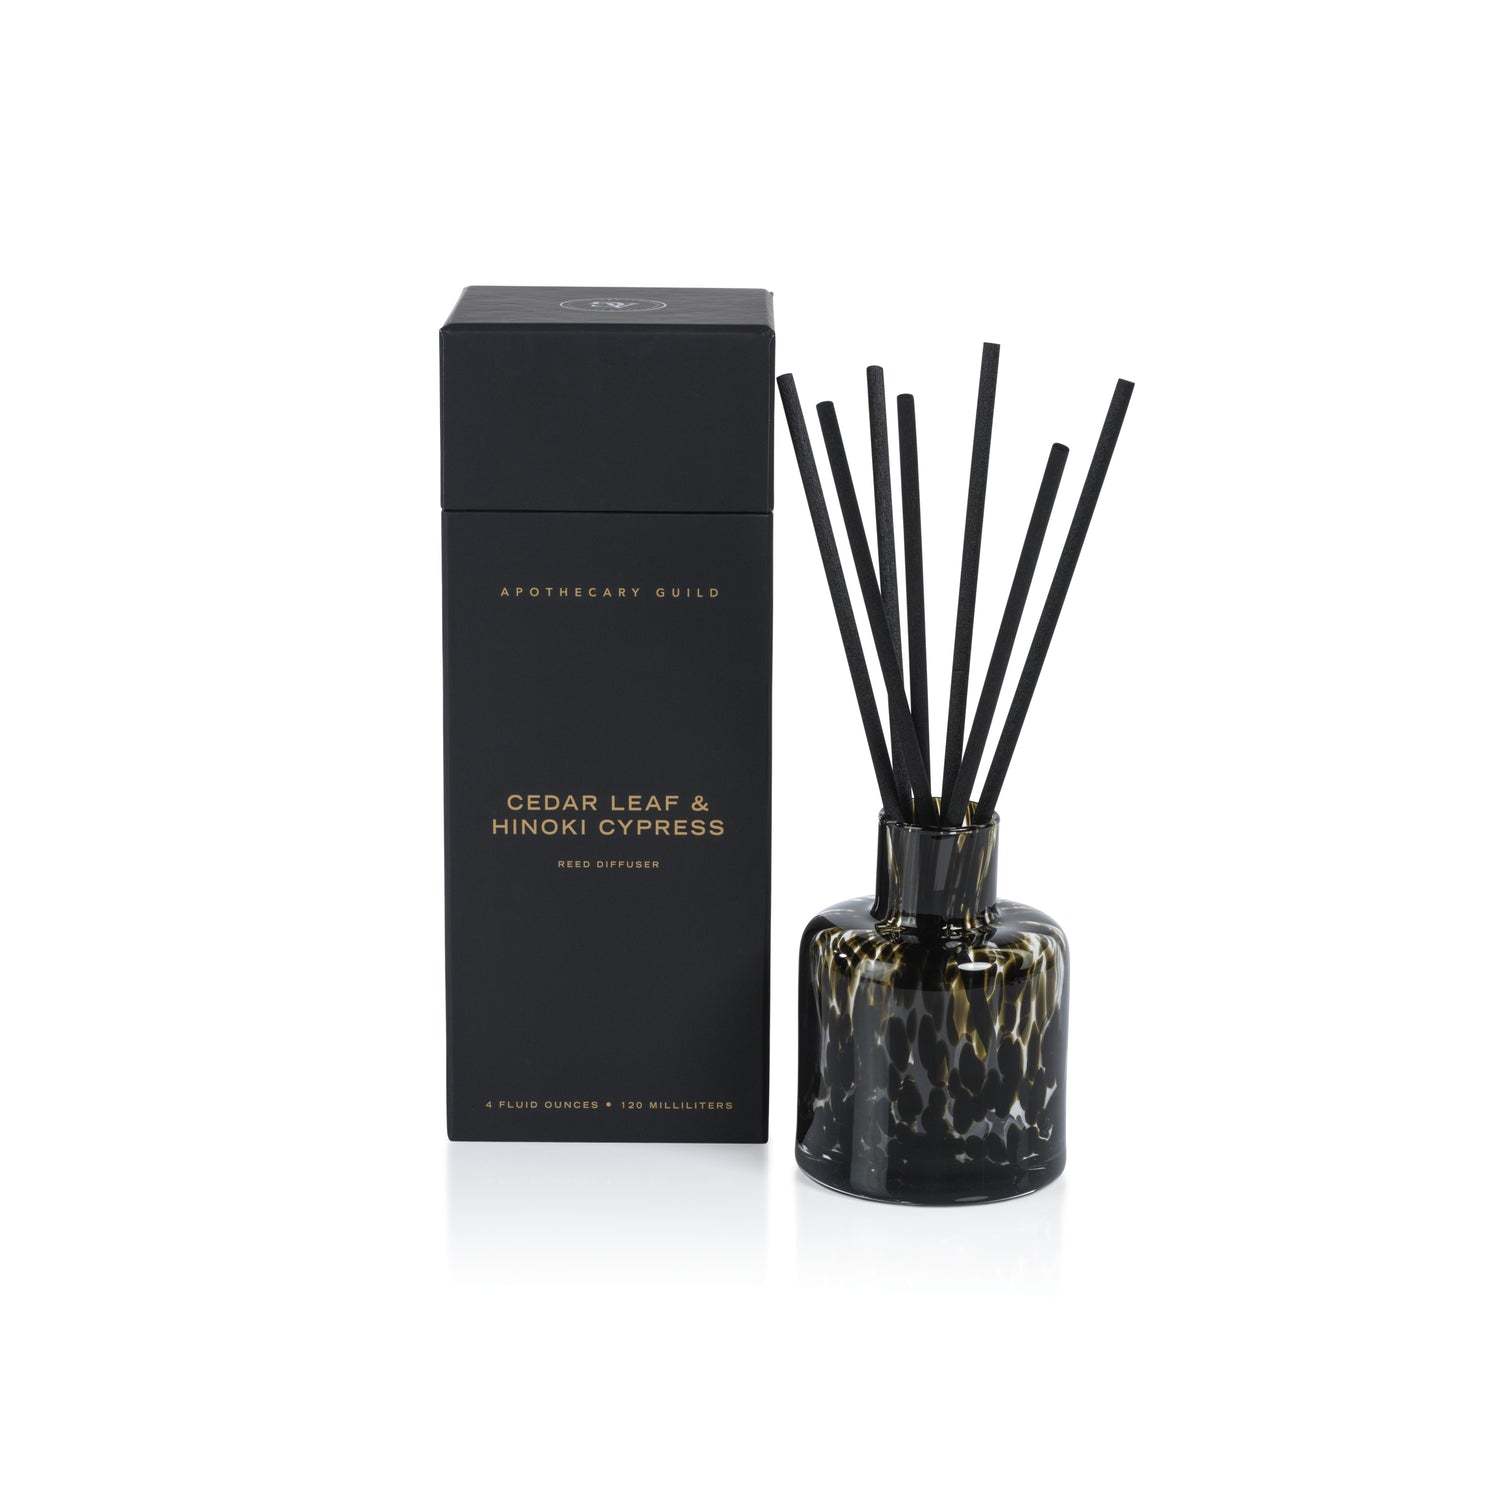 AG Opal Glass Reed Diffuser in Gift Box